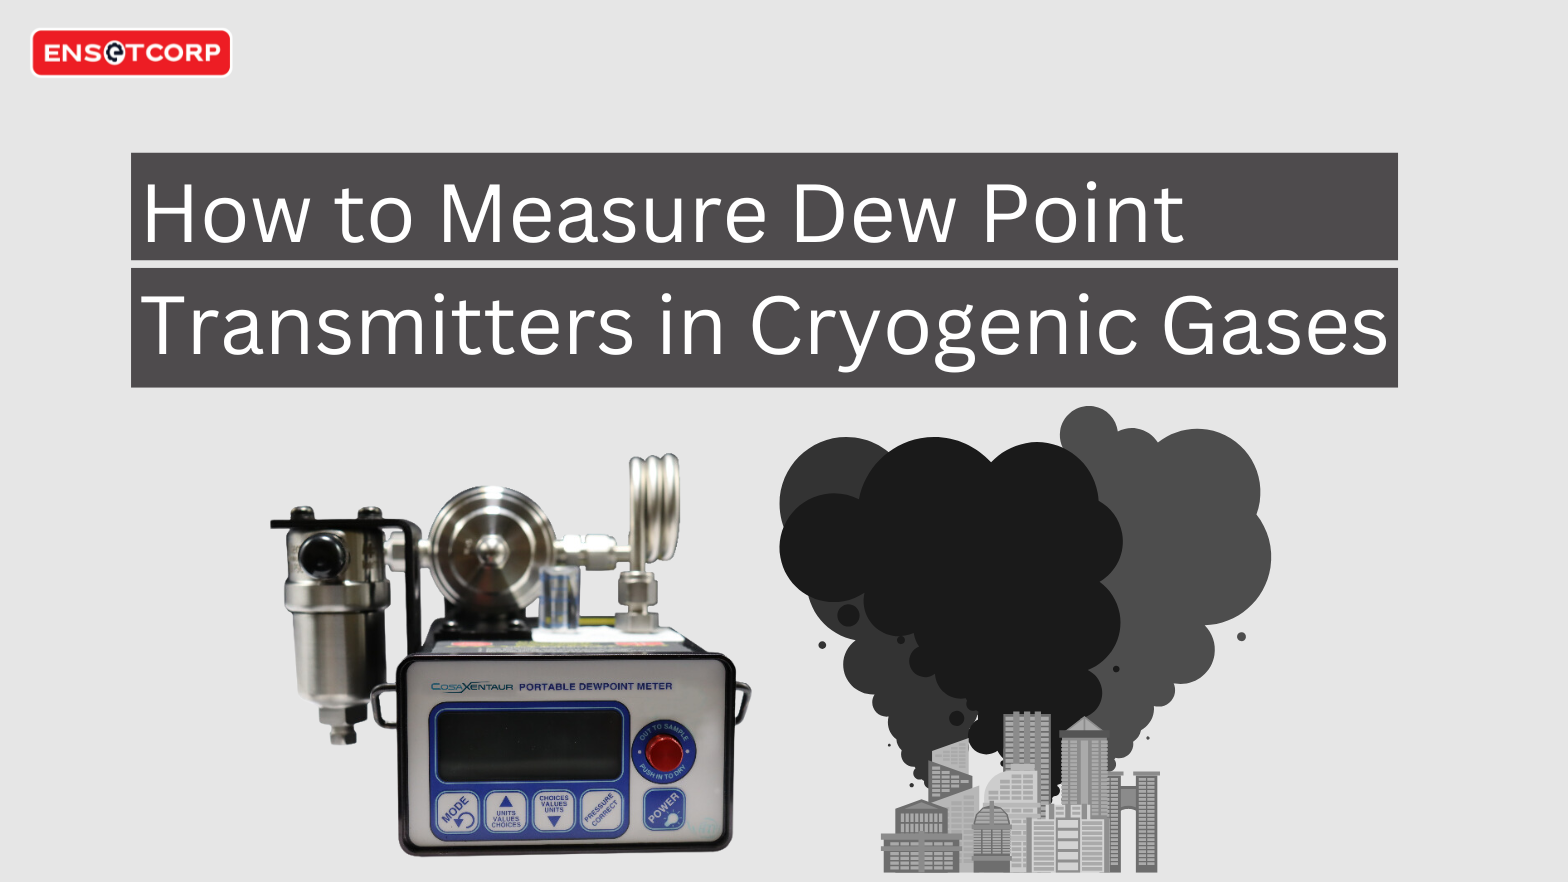 How to Measure Dew Point Transmitters in Cryogenic Gases